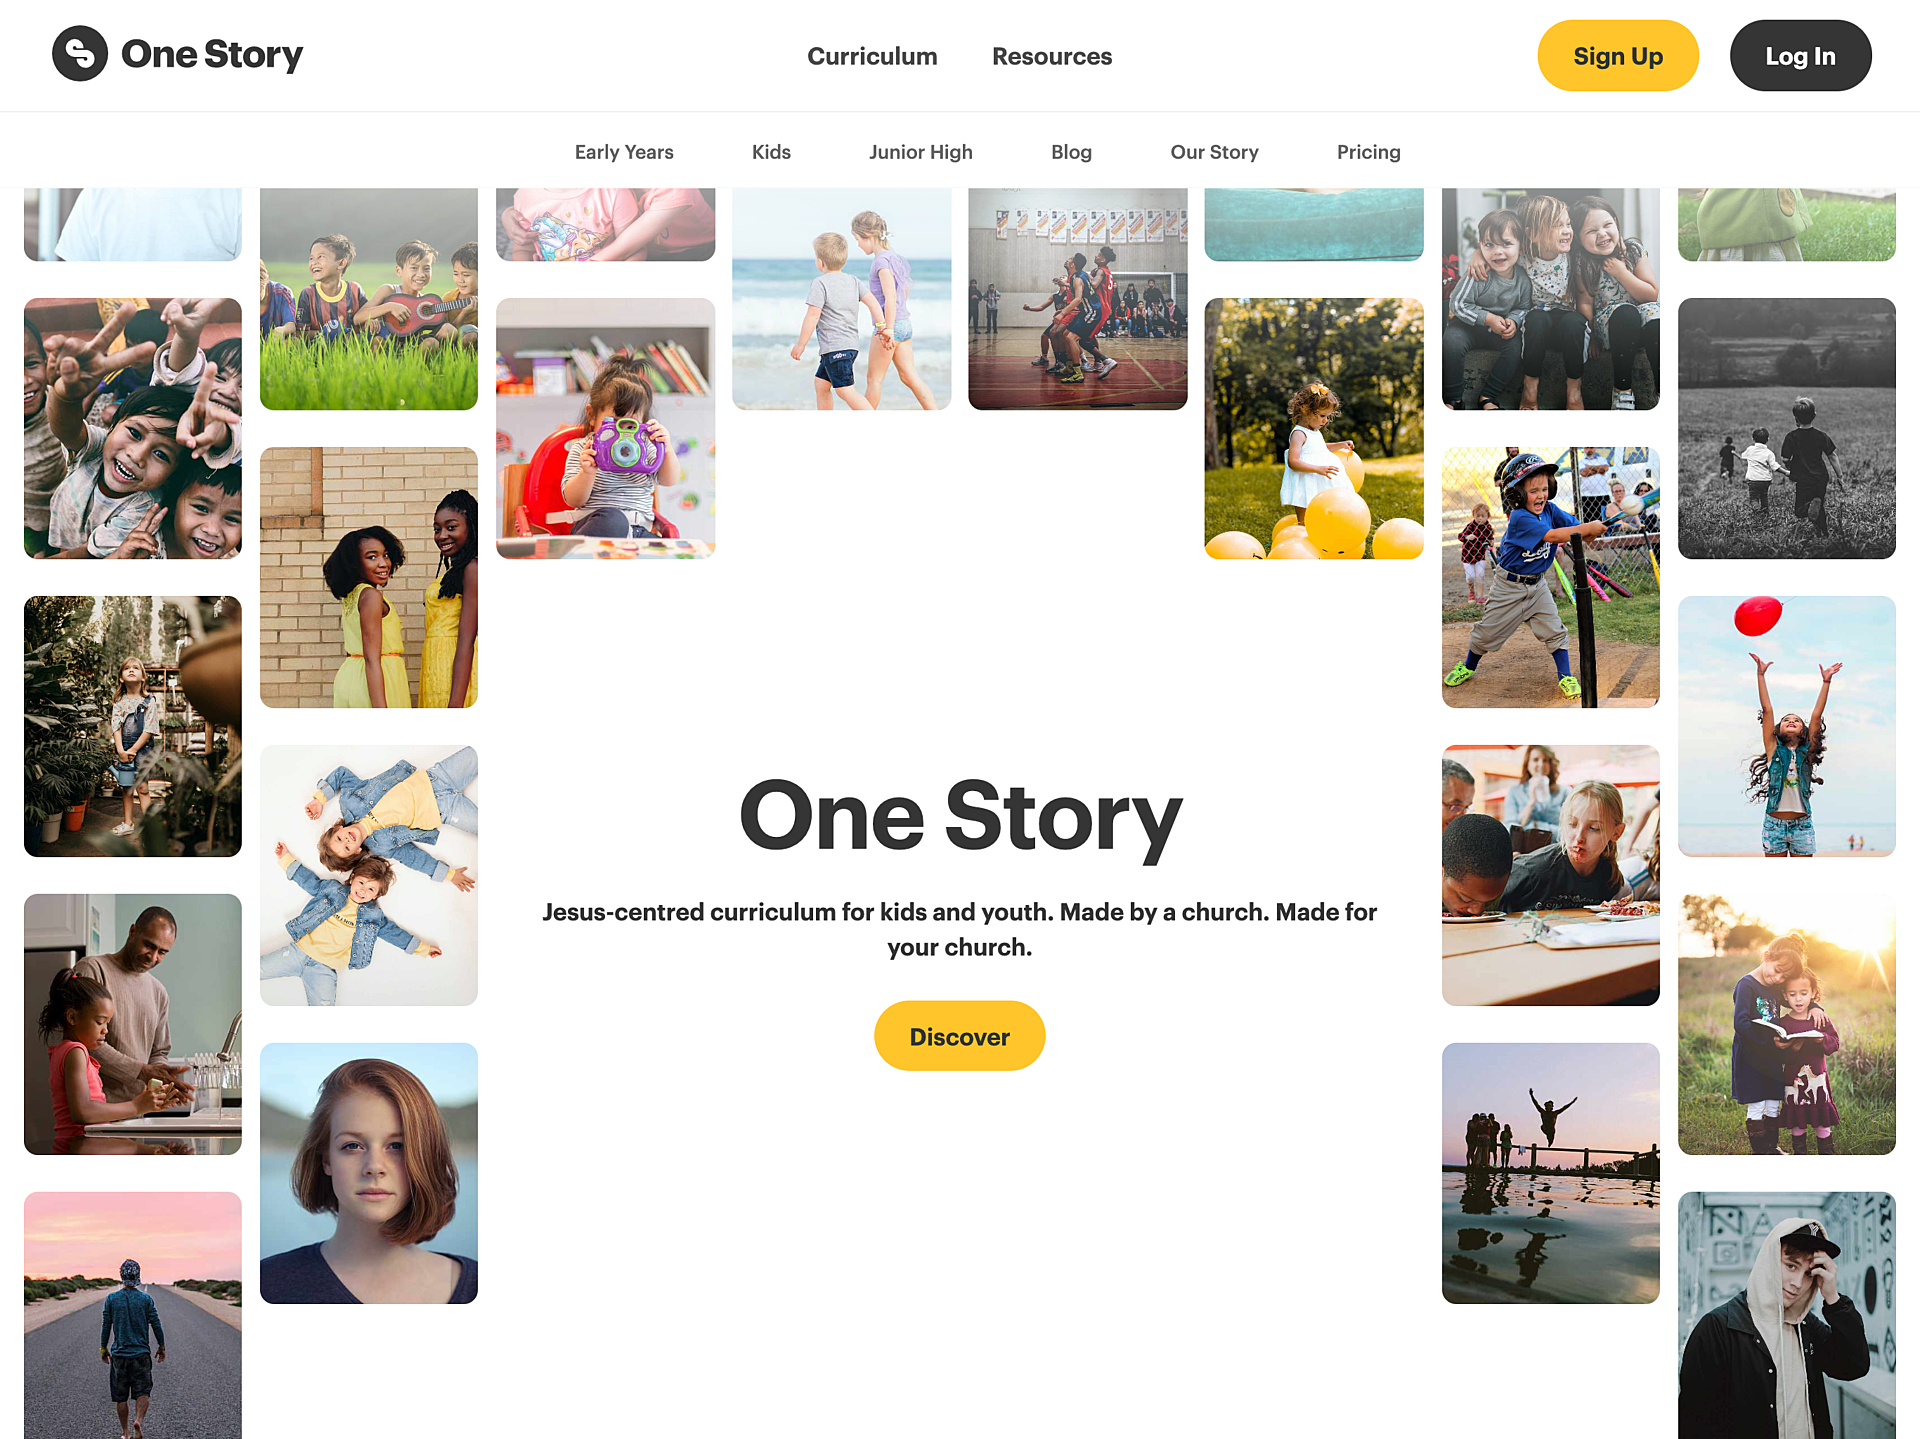 The One Story home page